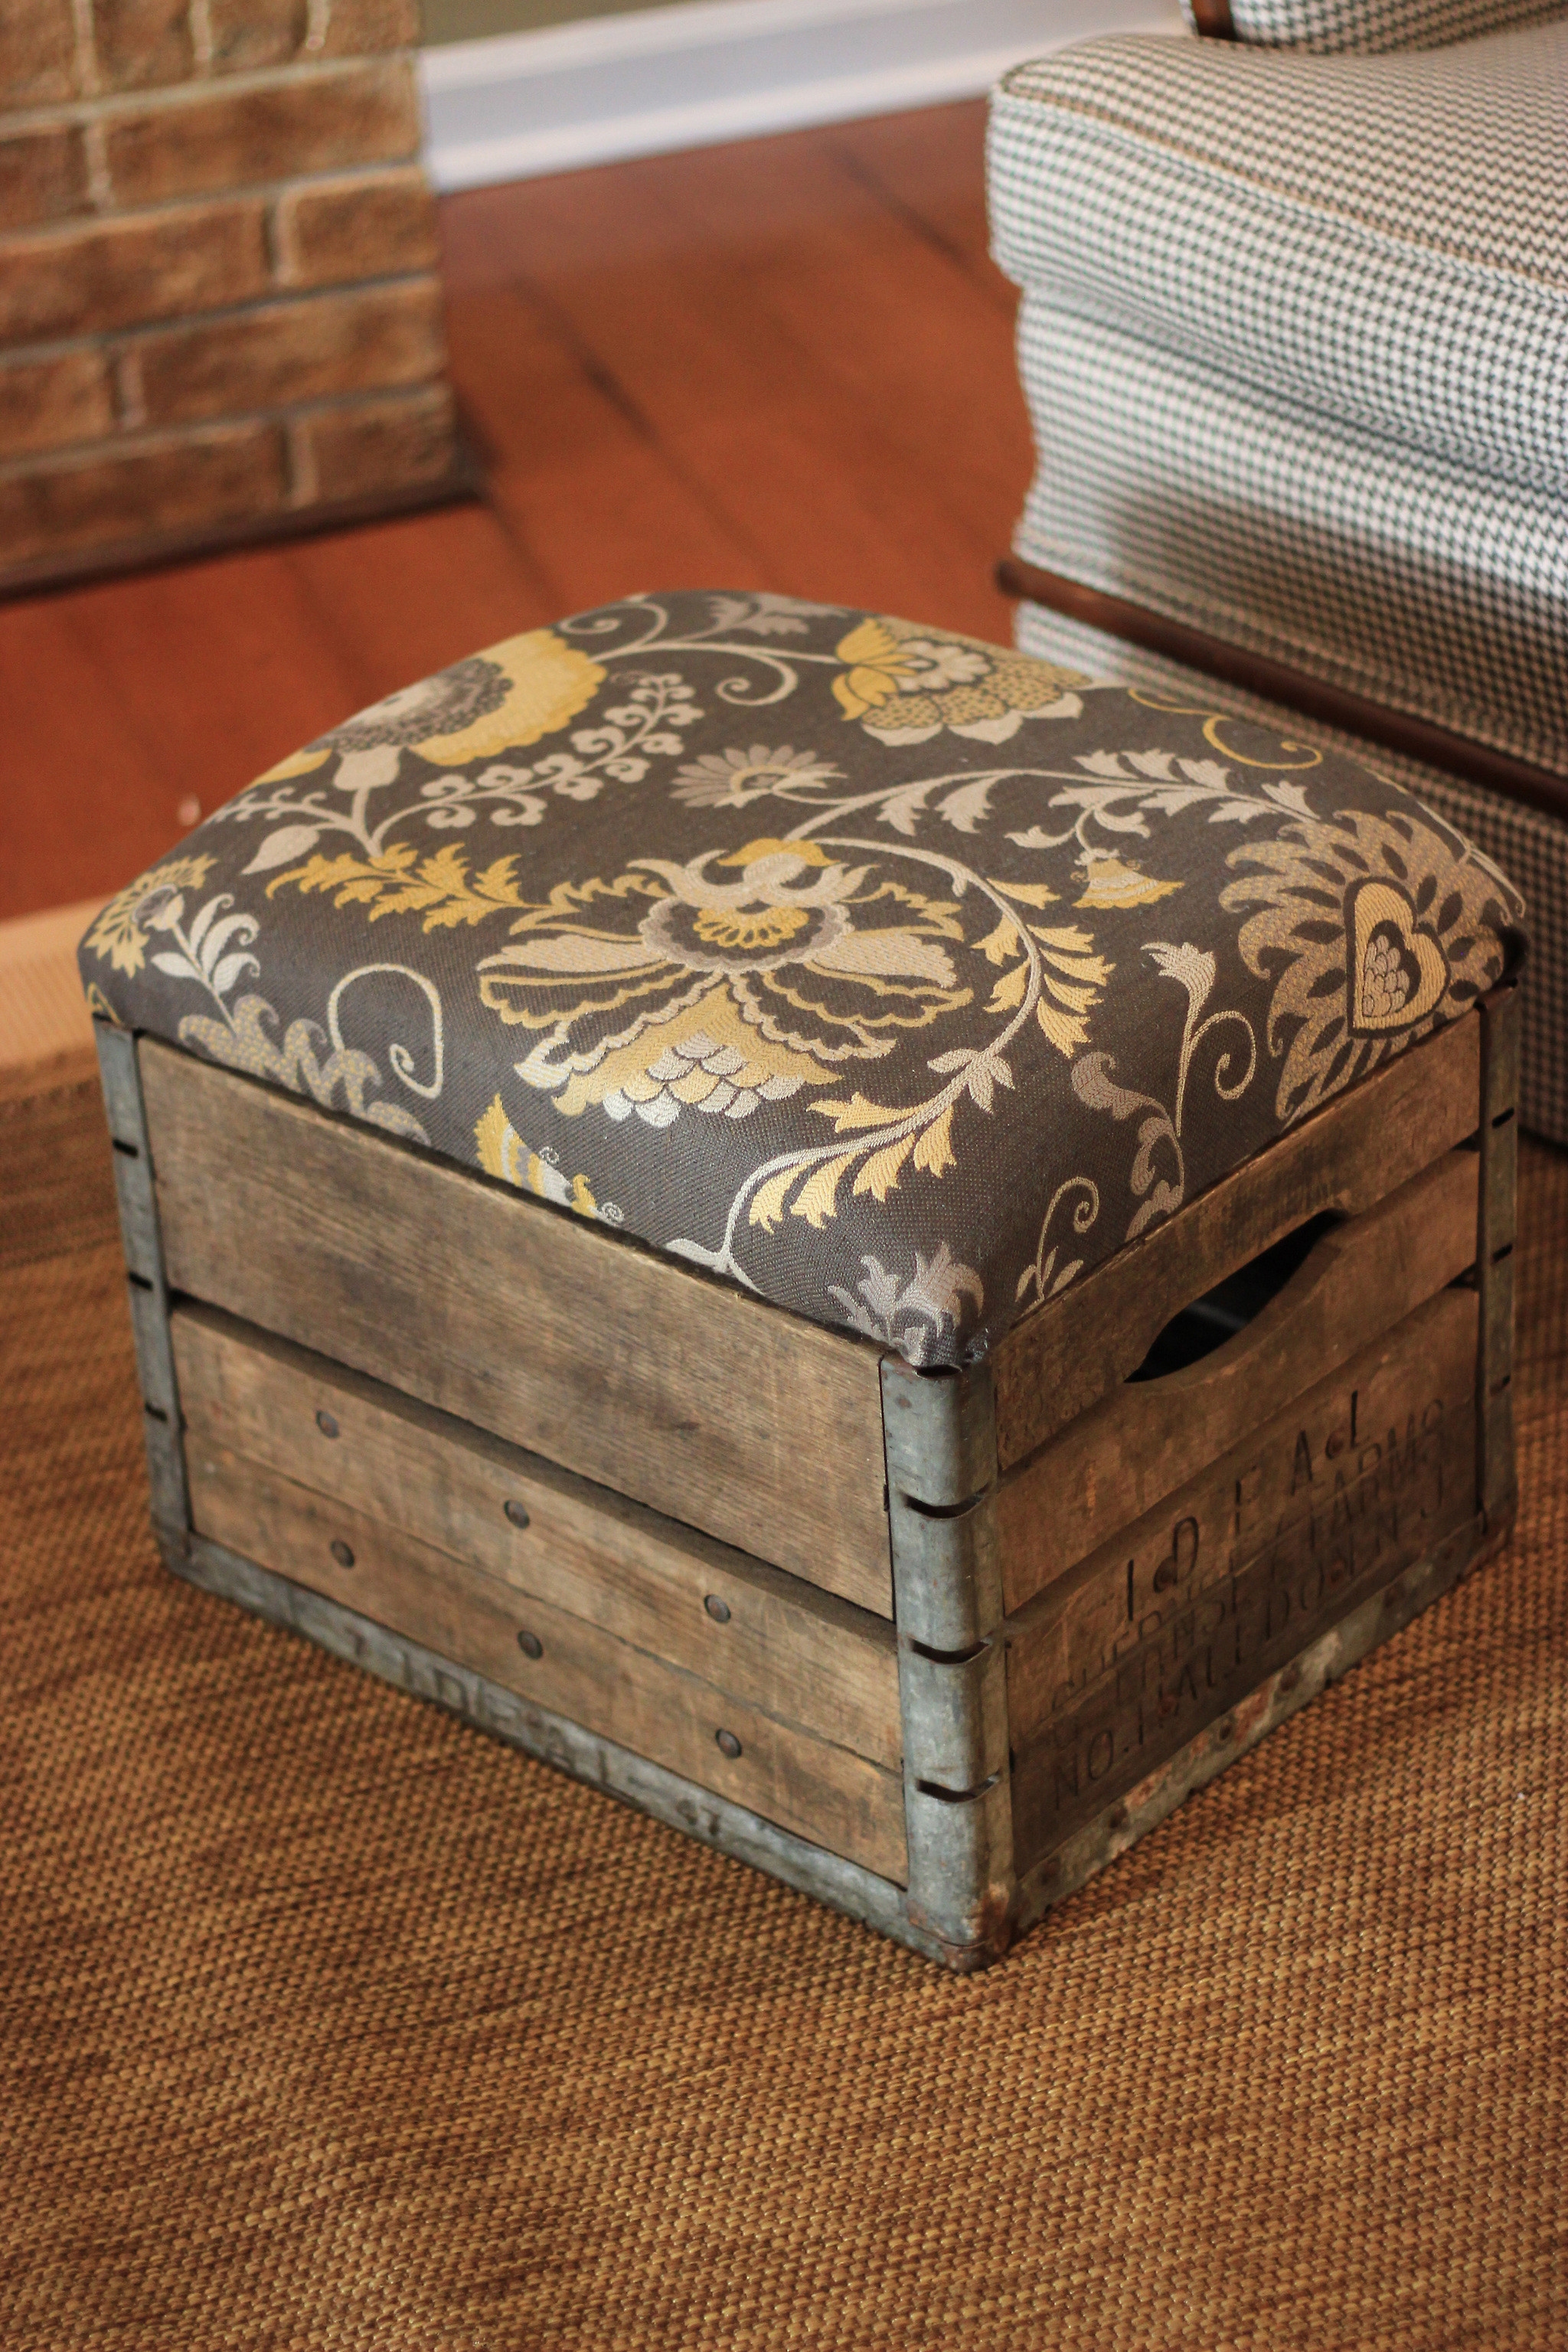 Best ideas about Wooden Crate DIY Projects
. Save or Pin 5 DIY projects using wooden crates Now.